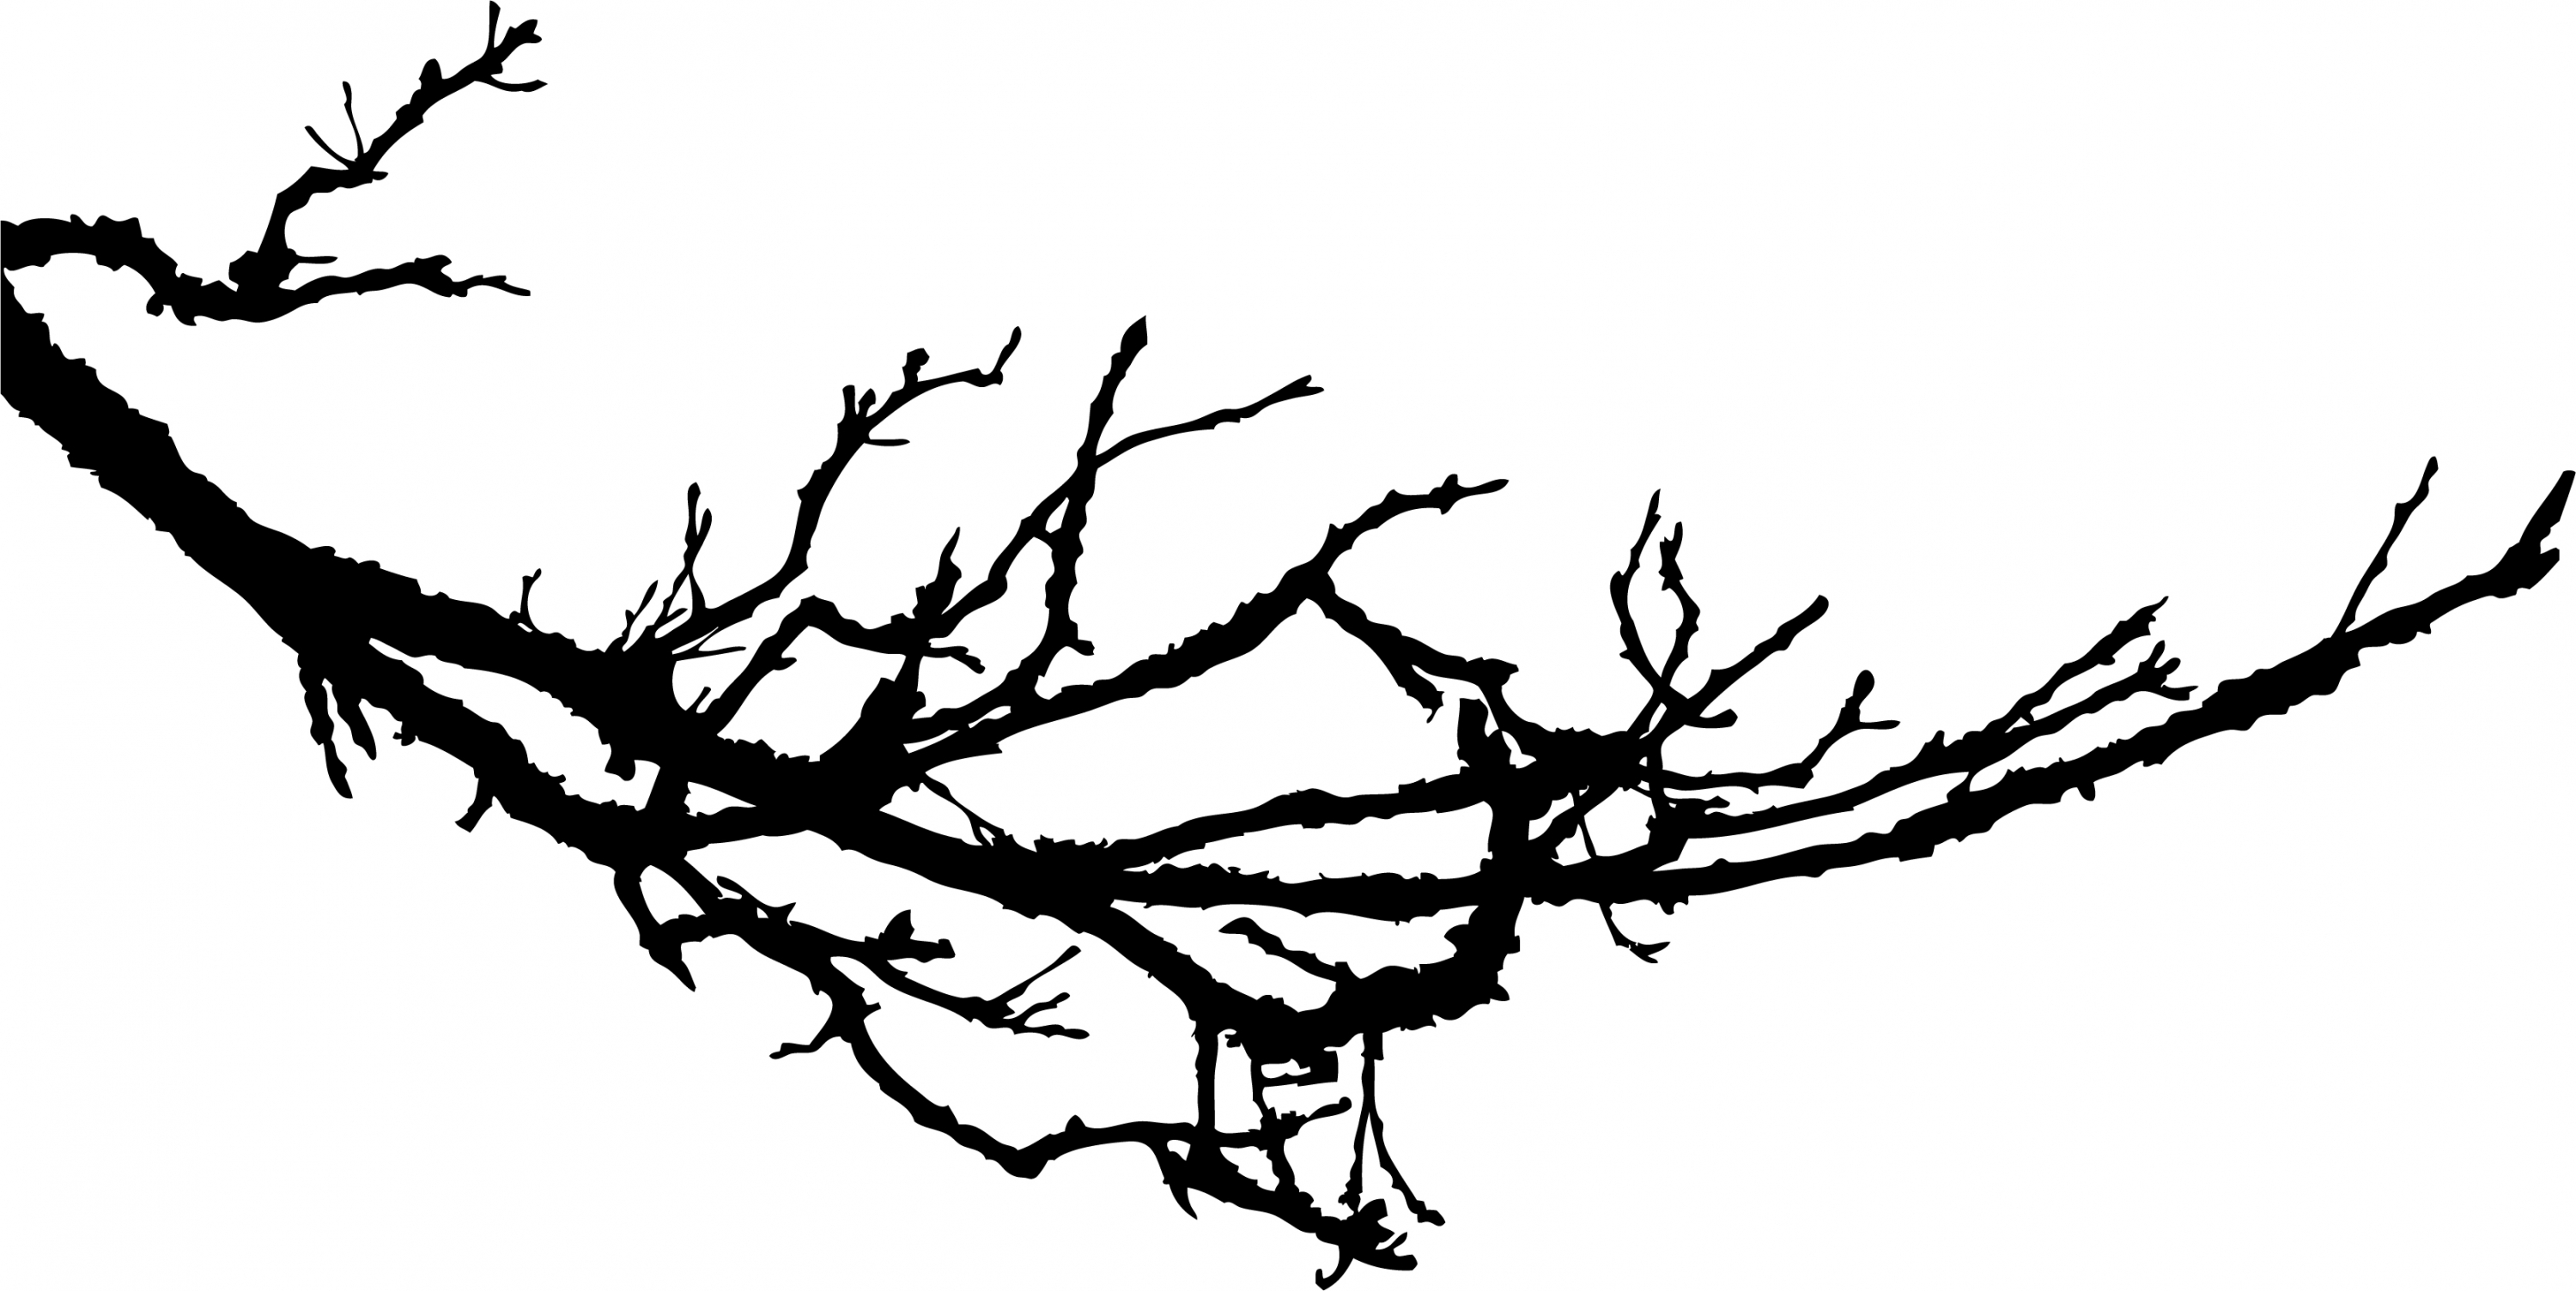 Tree Branch Vector Wallpaper High Quality : Nature Wallpaper 